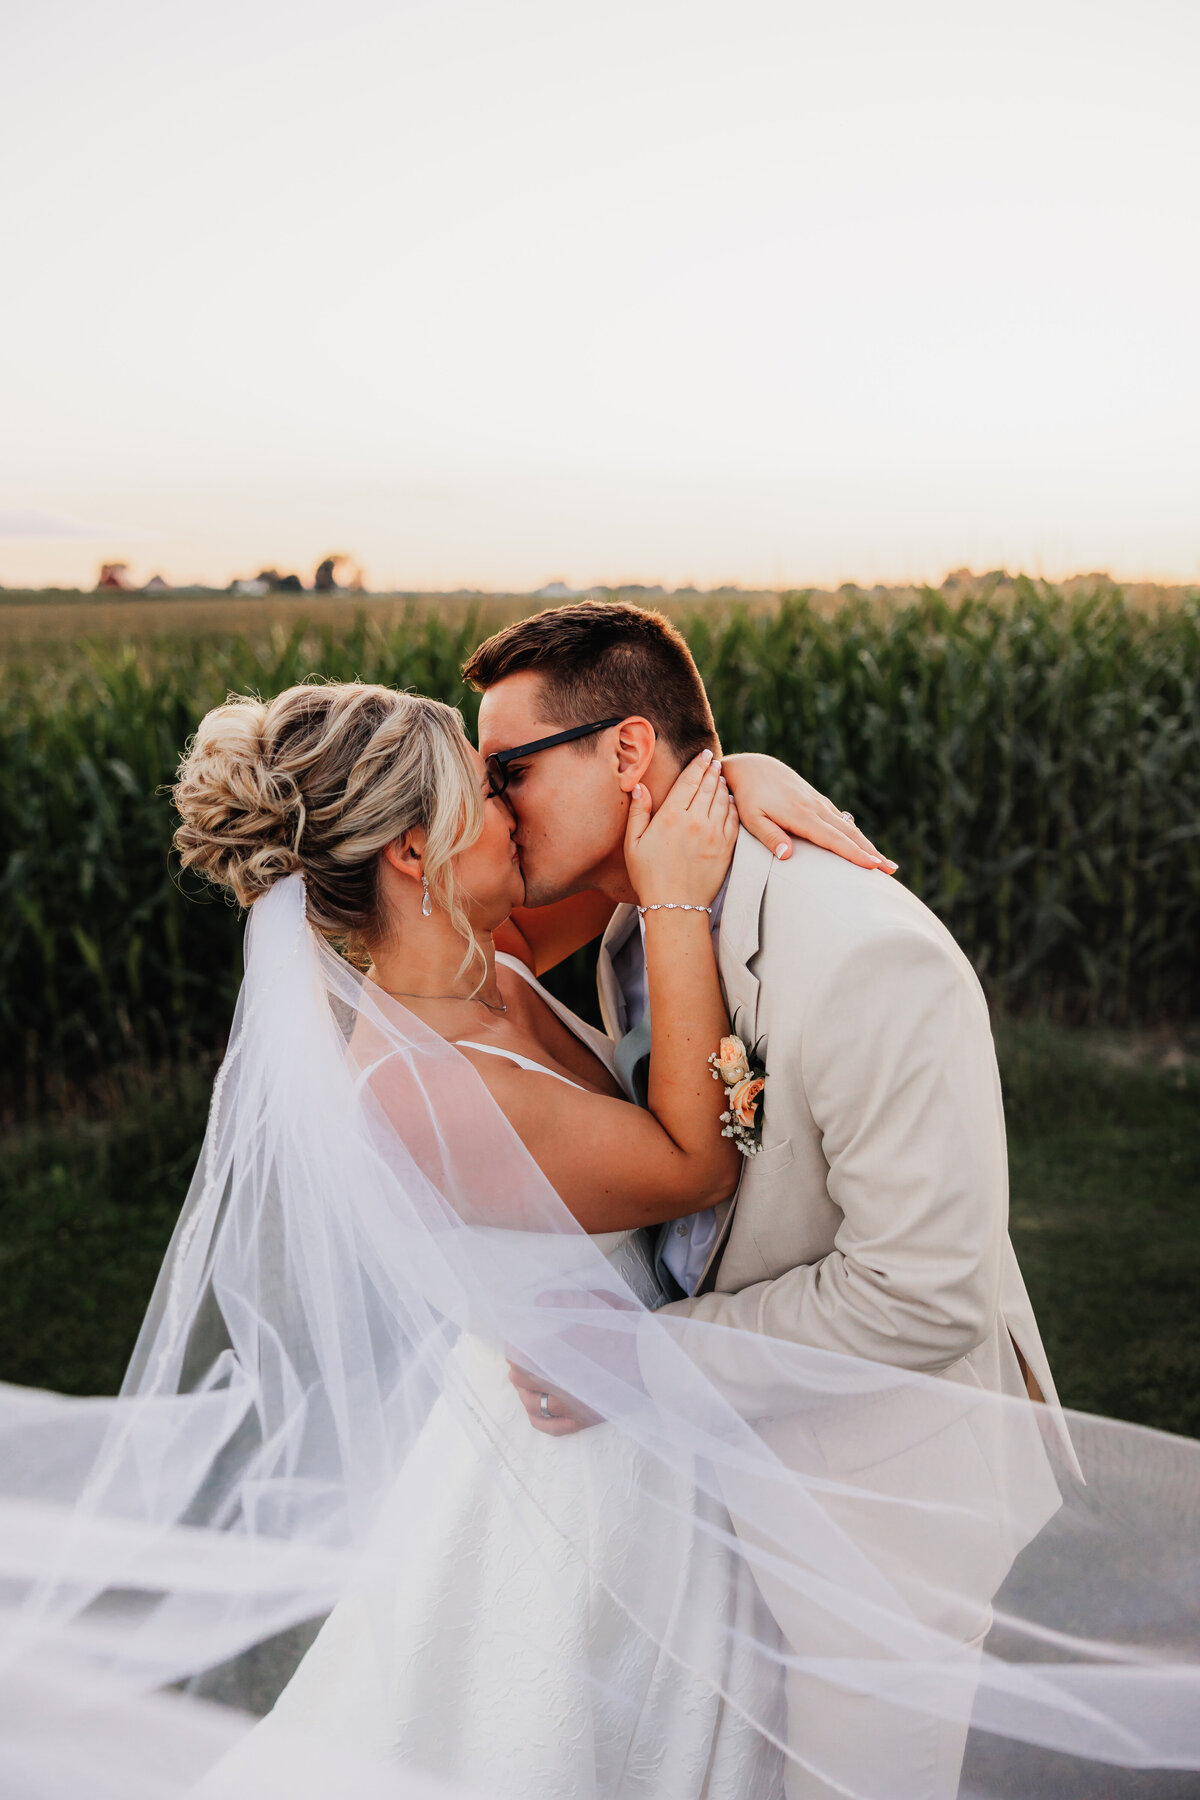 A Bride and groom share a passionate kiss in front of a corn field.